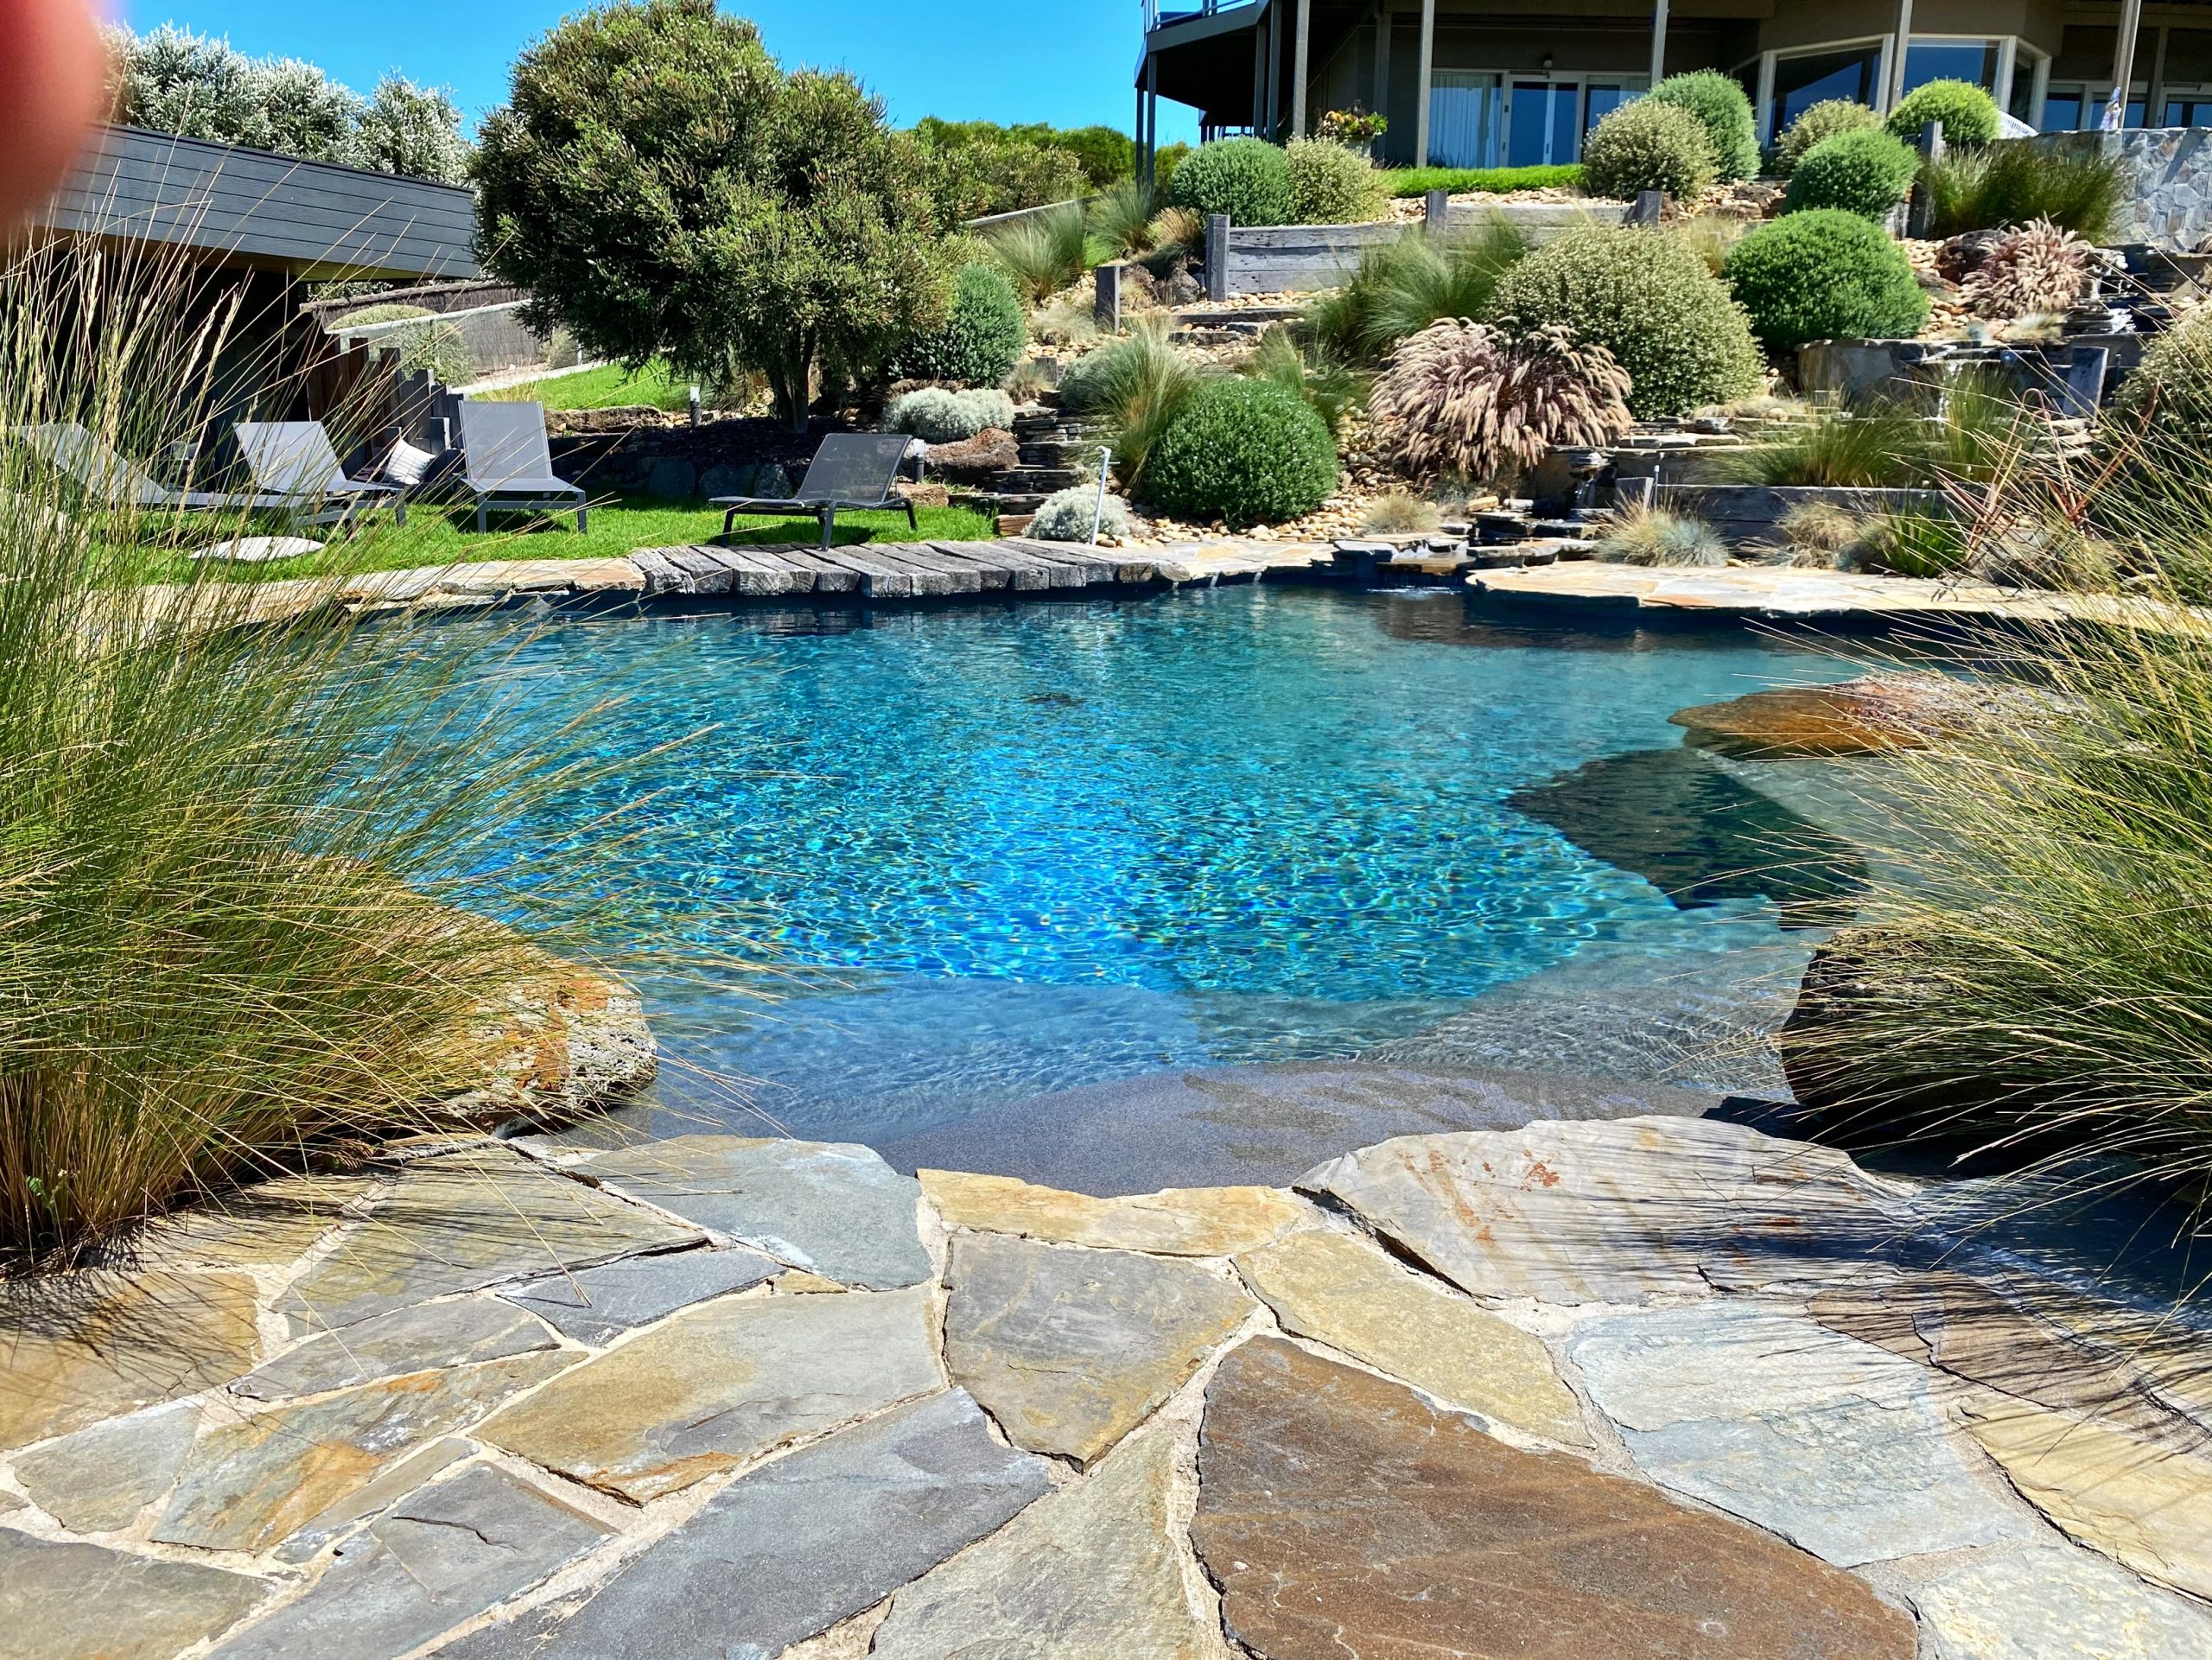 Gorgeous curved pool surrounded by stone paving and a wonderful garden — a true backyard oasis